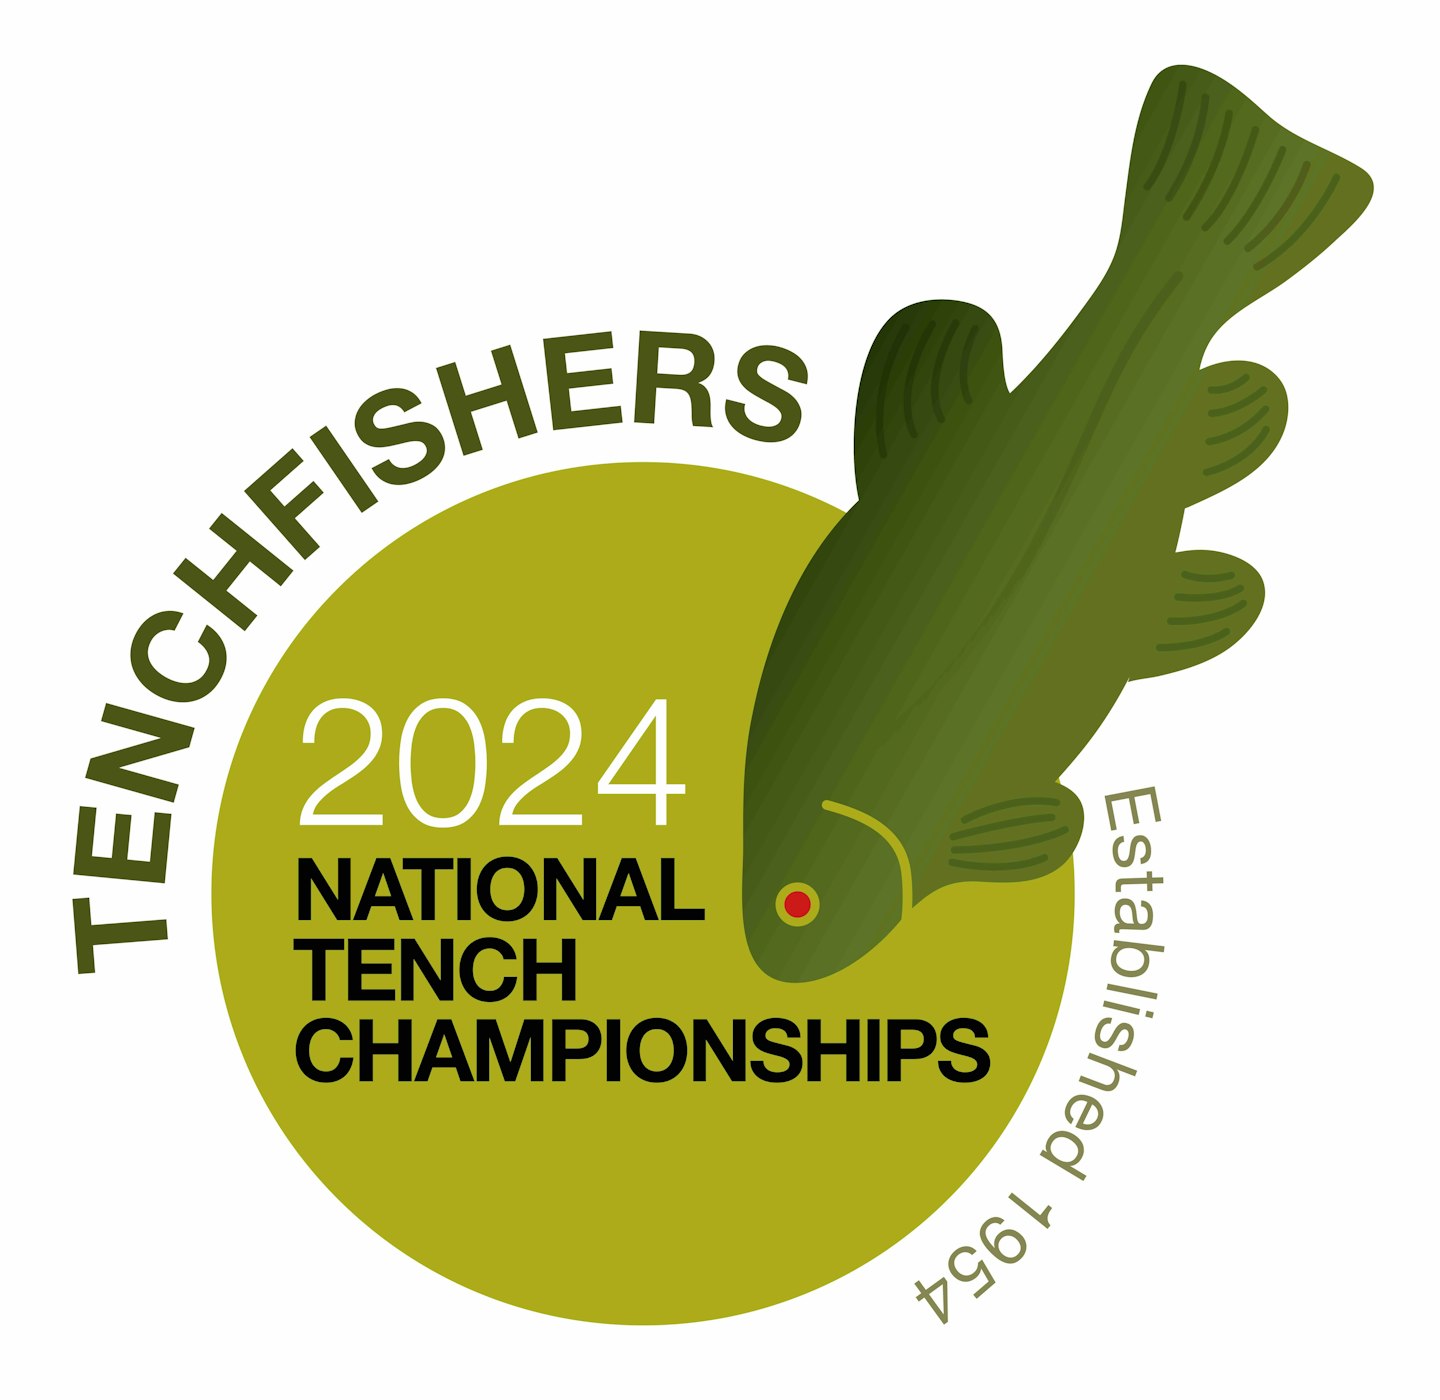 If you love tench fishing and meeting enthusiastic anglers, get signed up to the national.